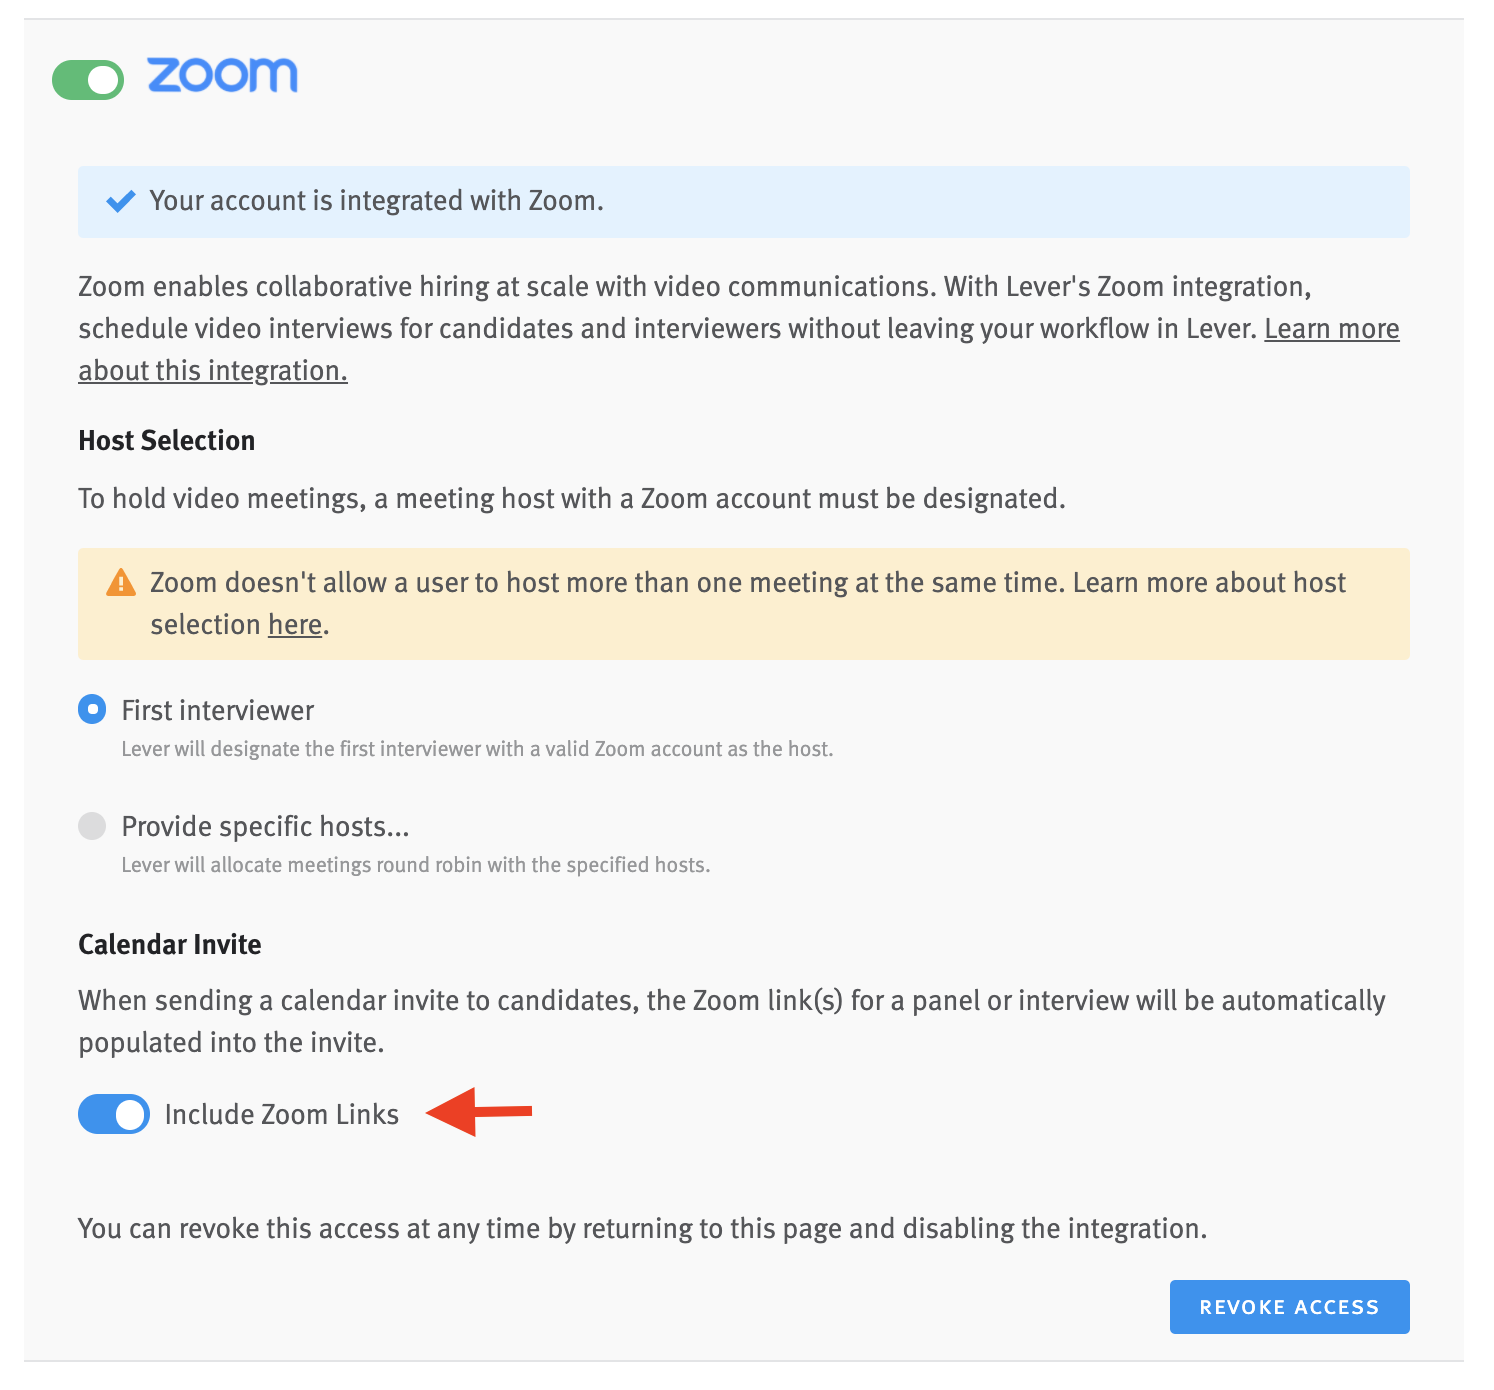 Active Zoom integration toggle with tile expanded to reveal Calendar Invite option with arrow pointing to active Include Zoom links toggle.